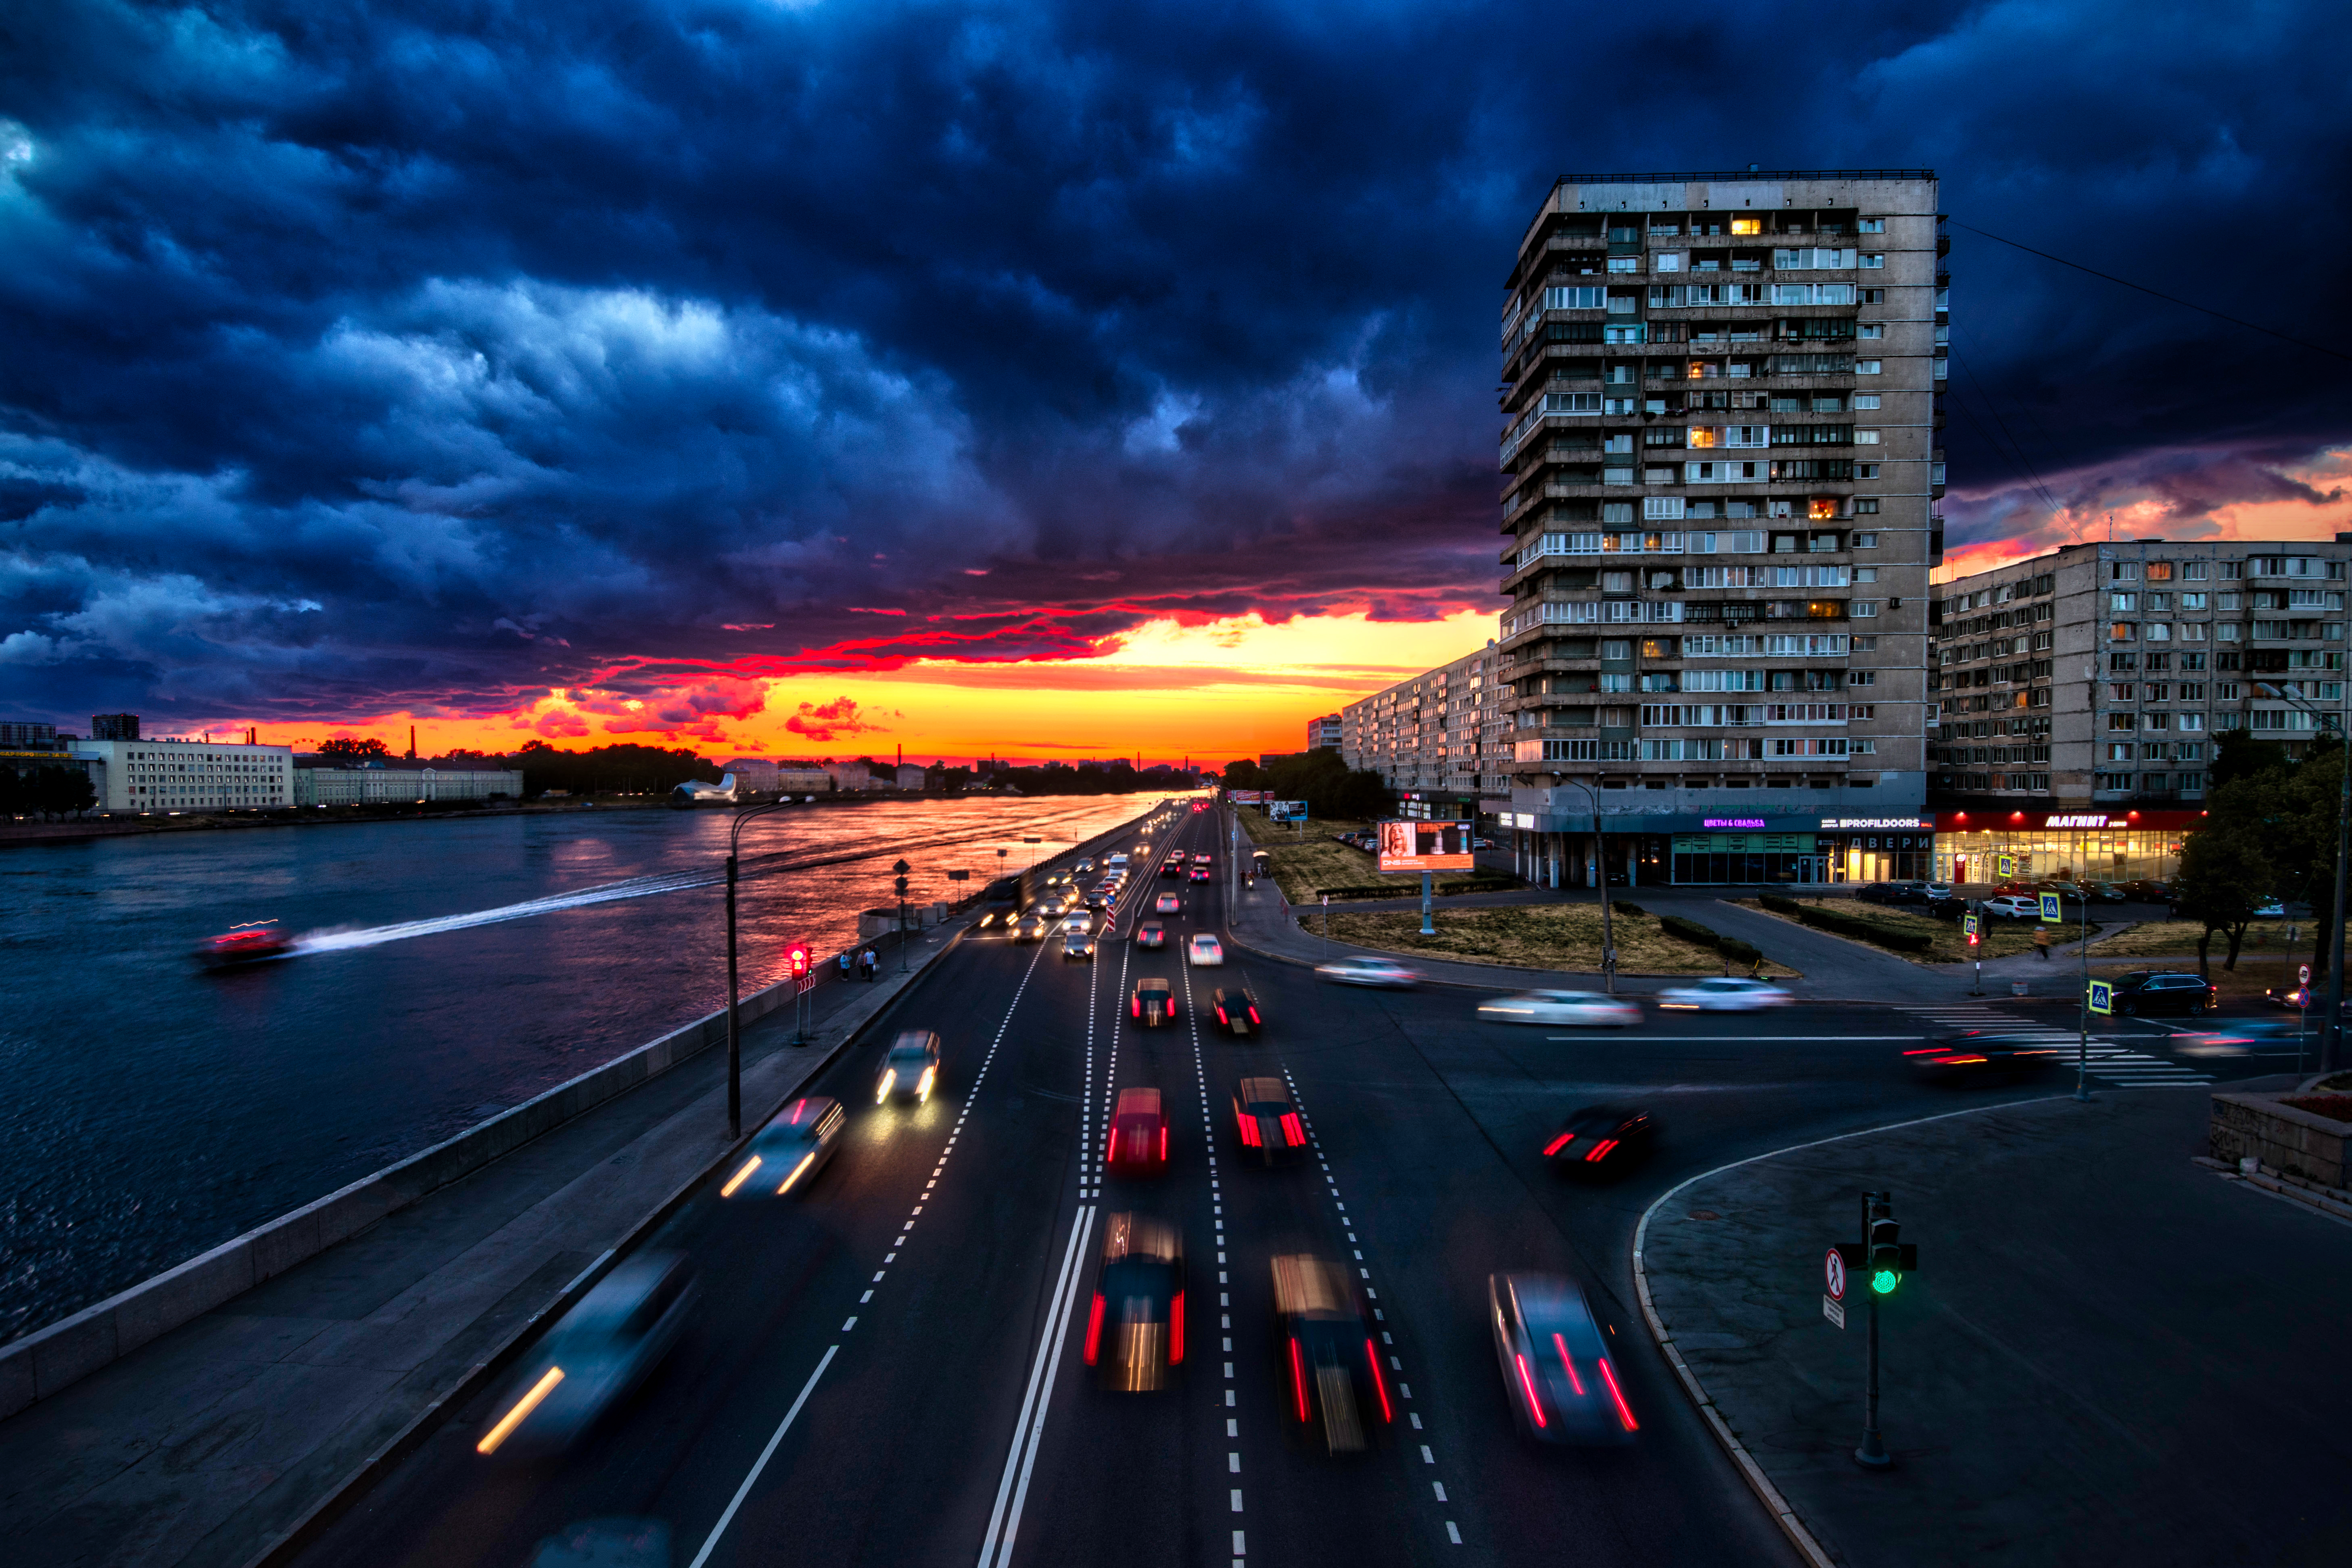 Road Urban City Building Water Boat Sunset Night Car Lights Russia 5830x3887